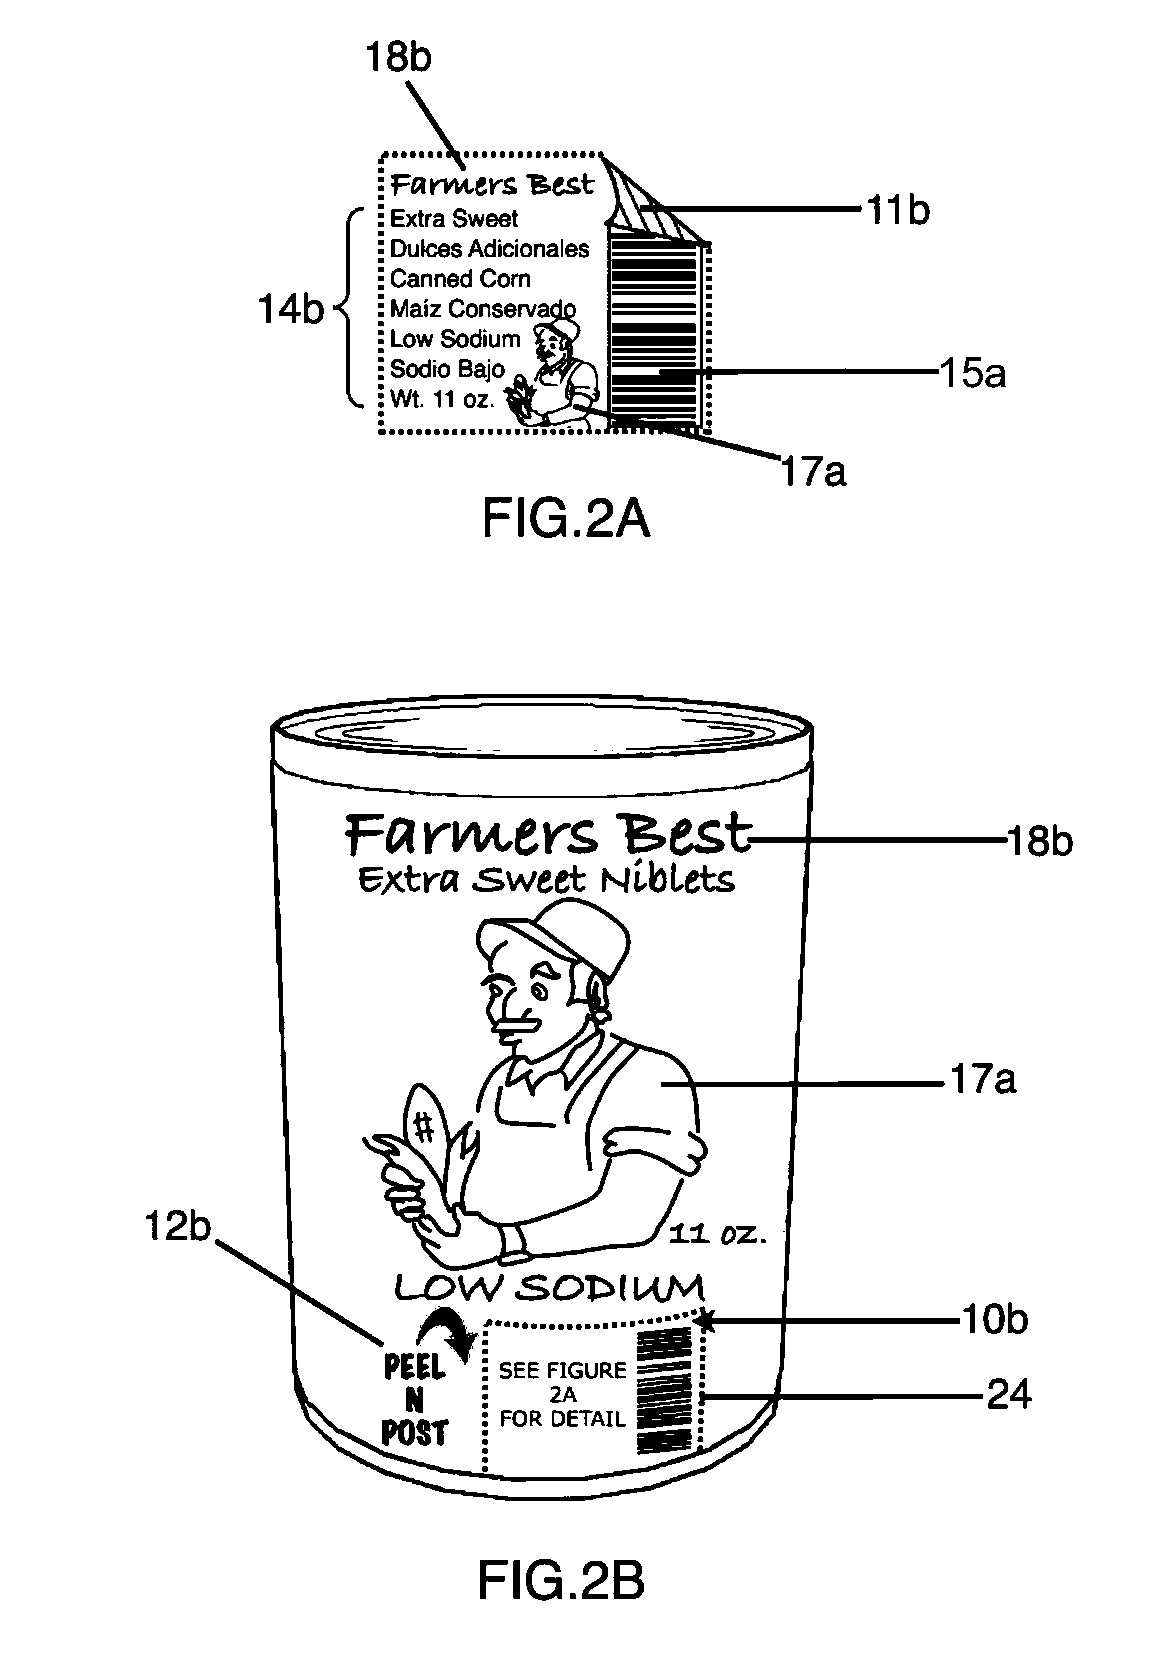 Consumer product recognition system